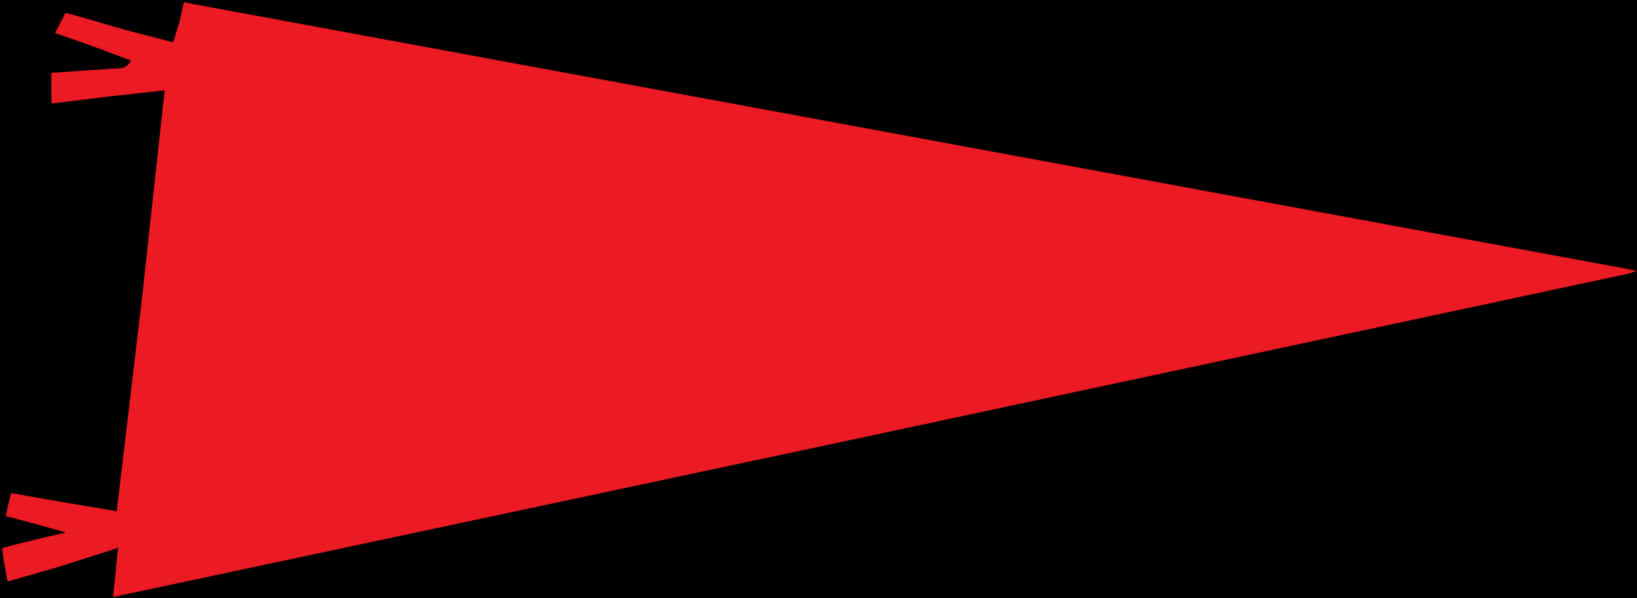 Red Triangular Banner Graphic PNG